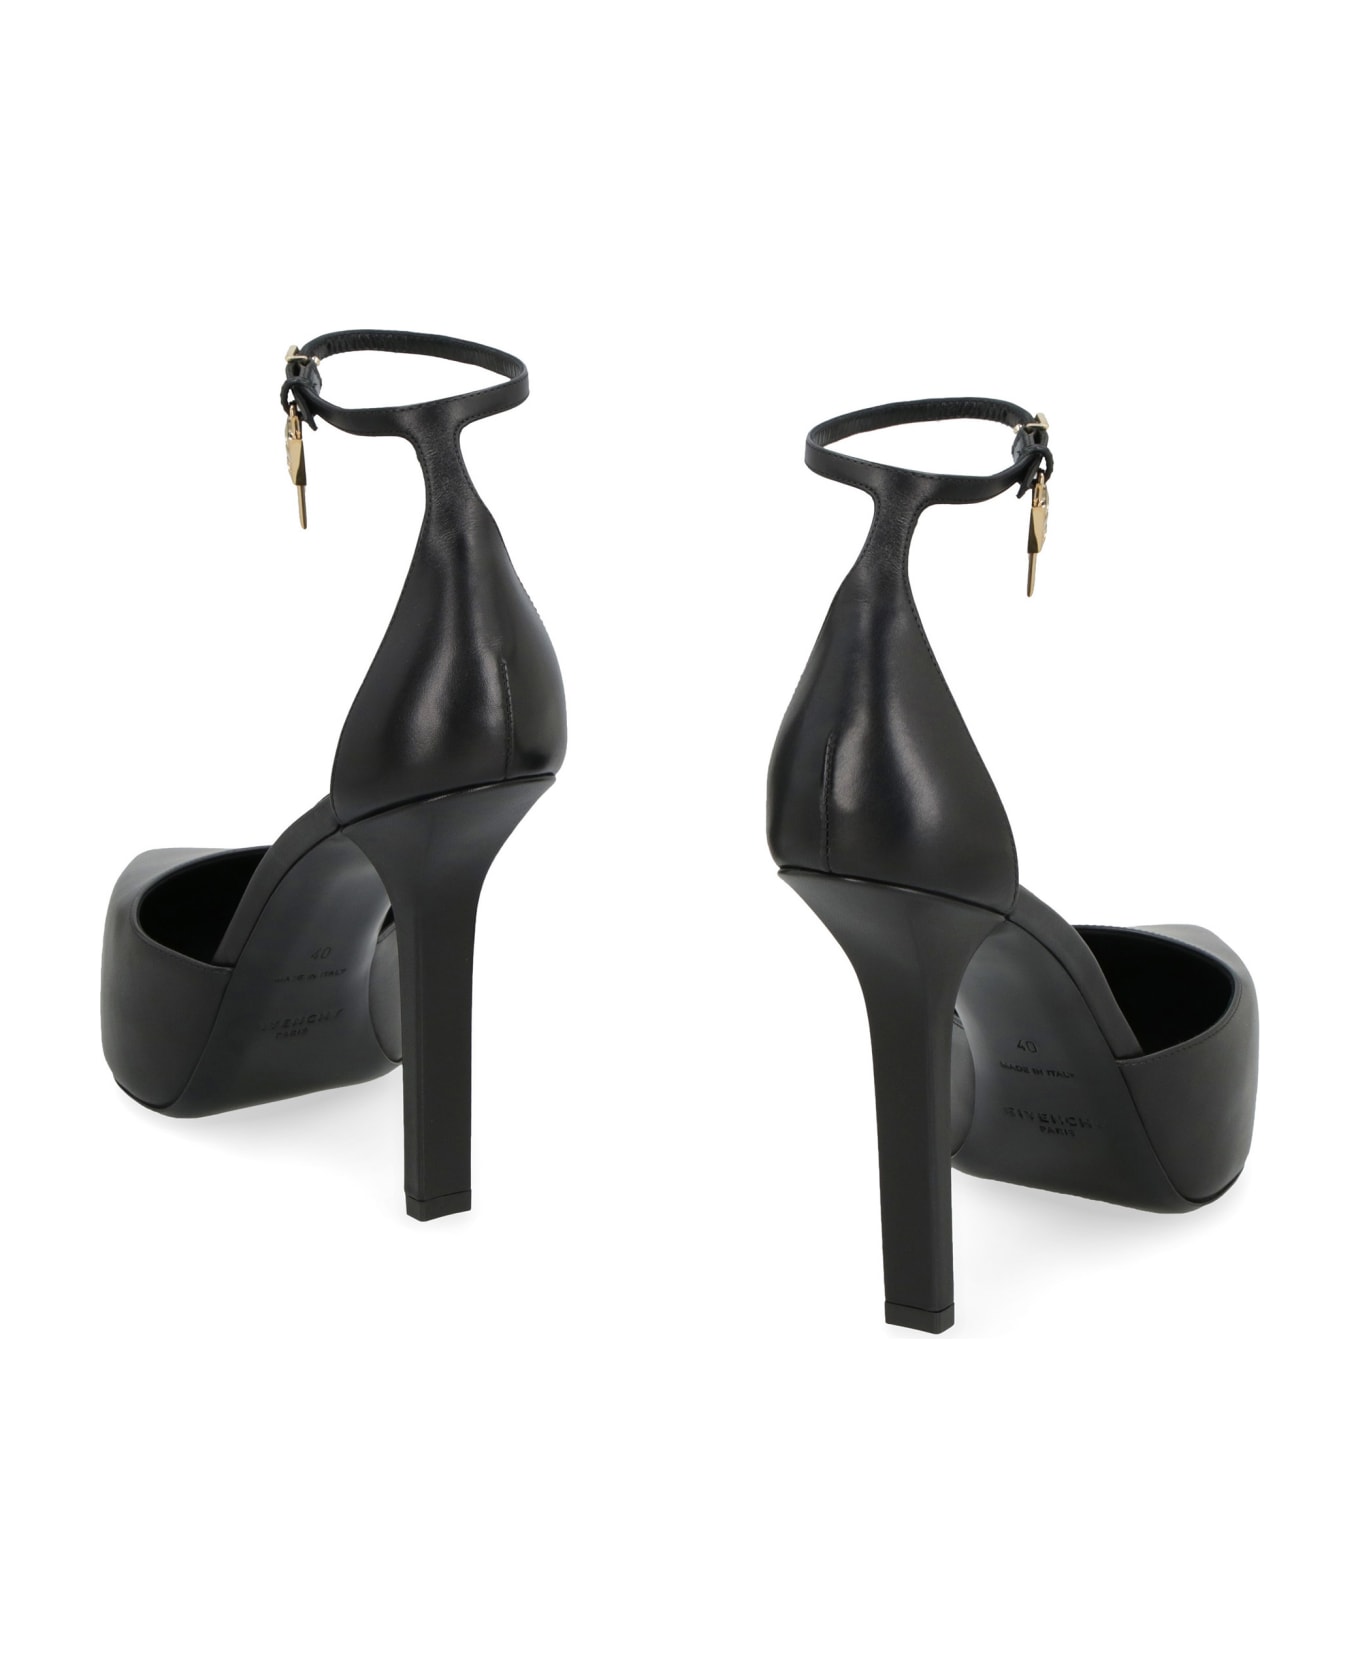 Givenchy G-lock Leather Pumps - Nero